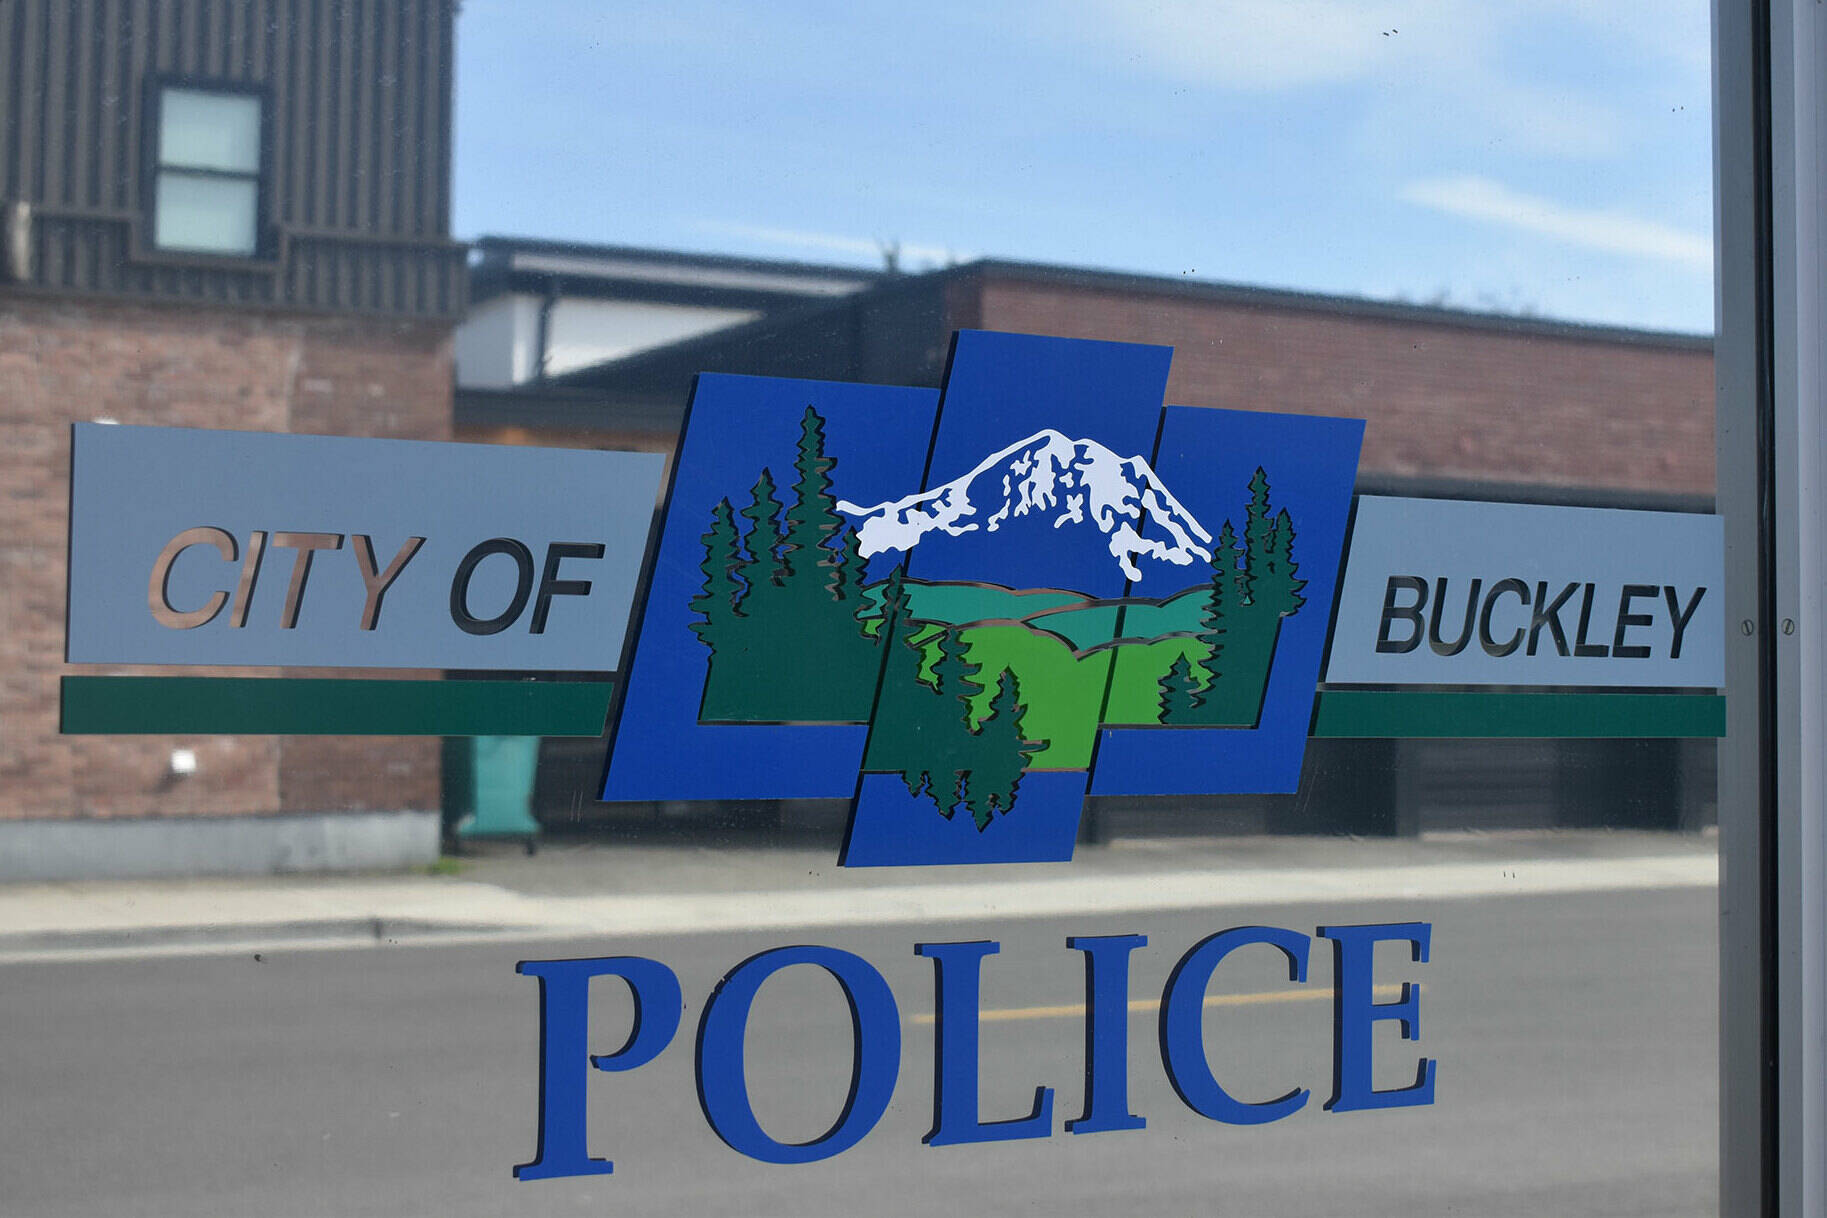 The Buckley Police Department, located at 146 S Cedar St.